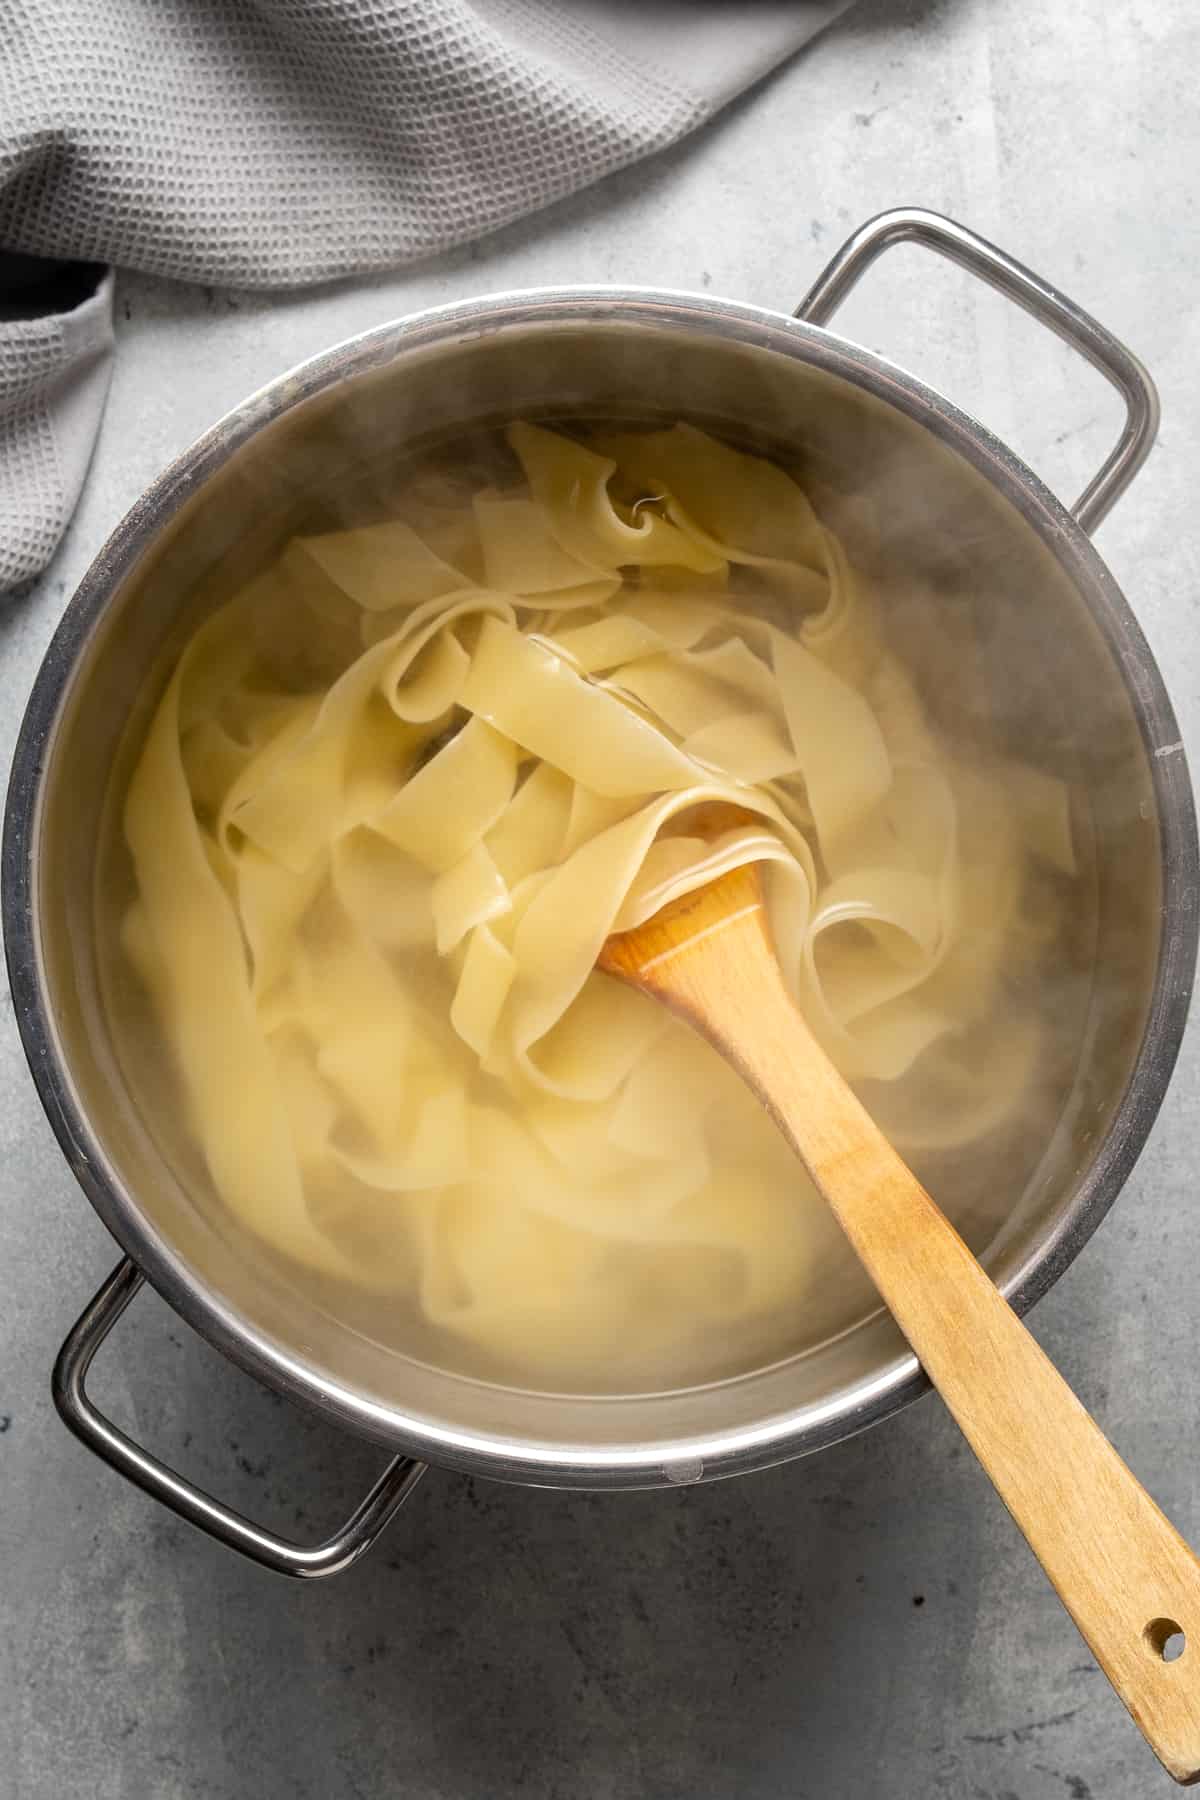 Pasta cooking in a pot and a wooden spoon in it.